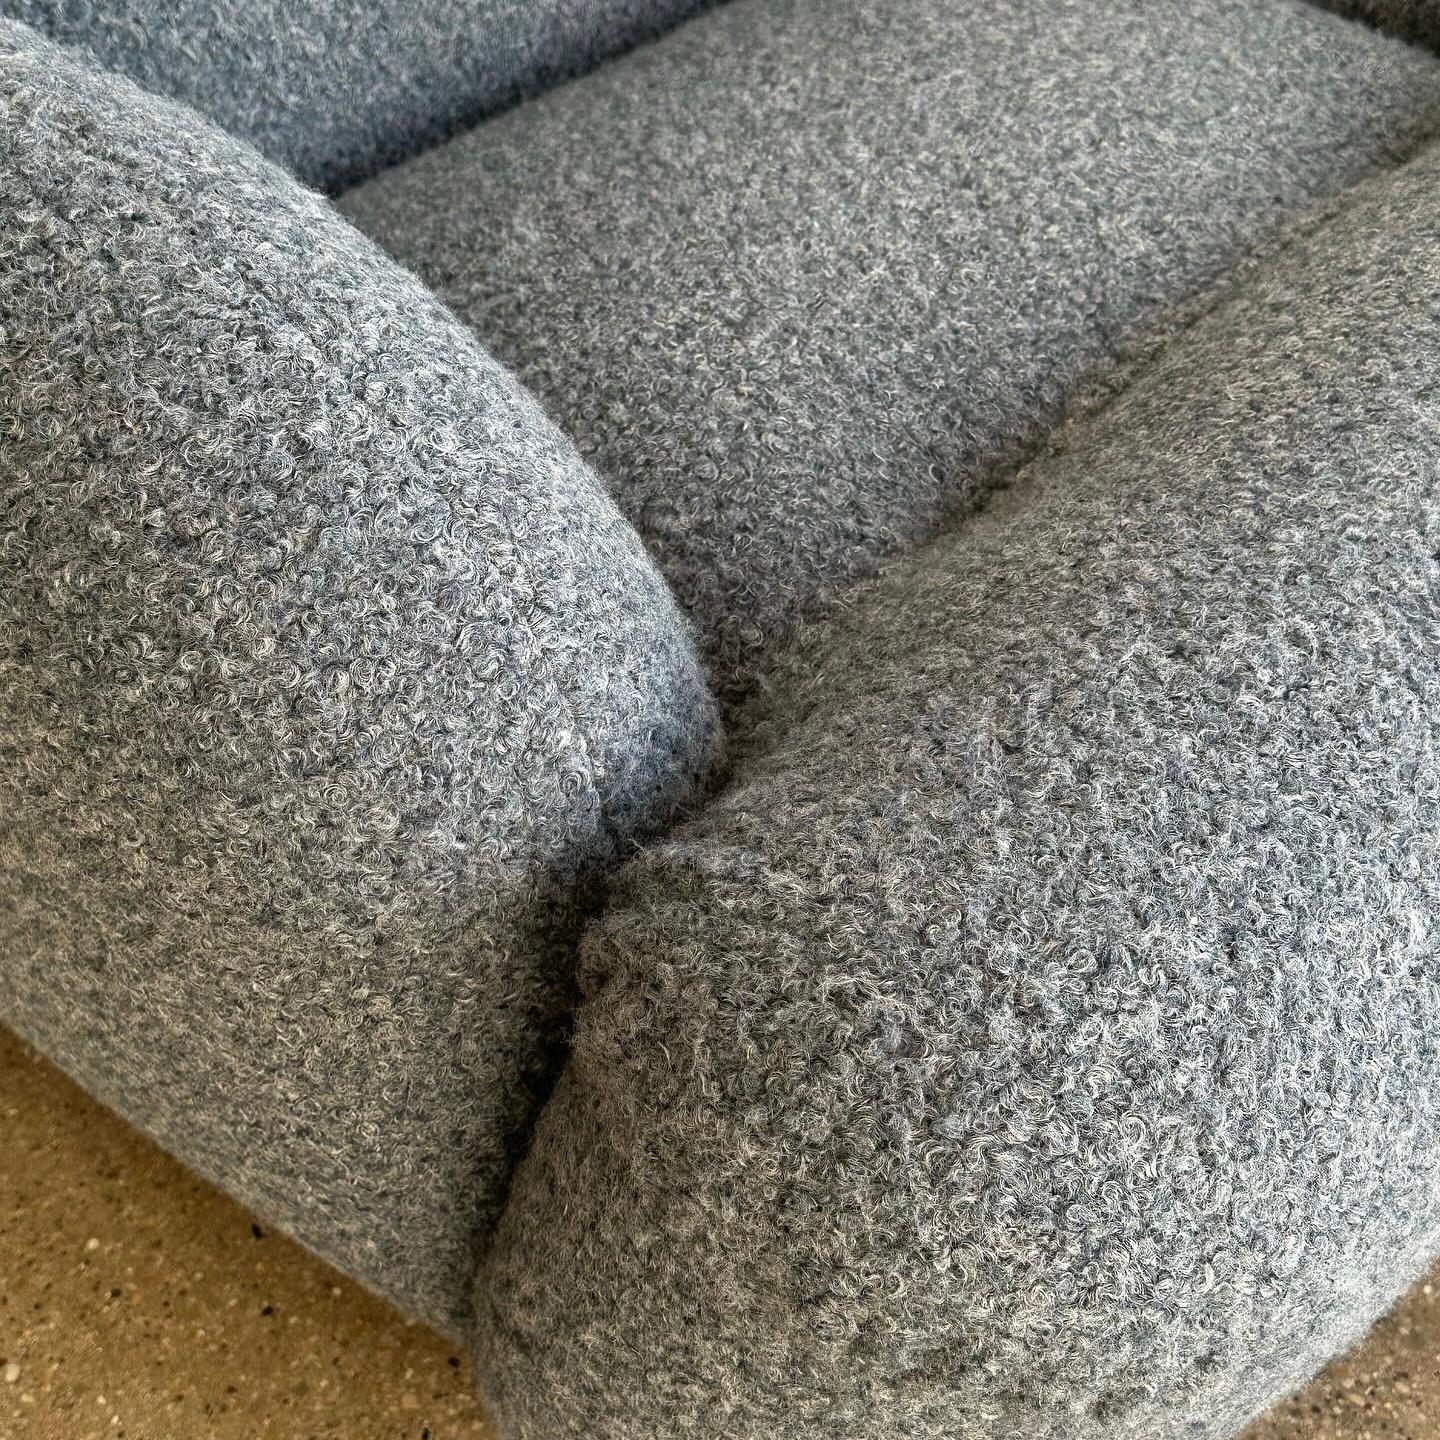 fully reupholstered in sherpa boucle, excellent condition. Price is for the set of two 